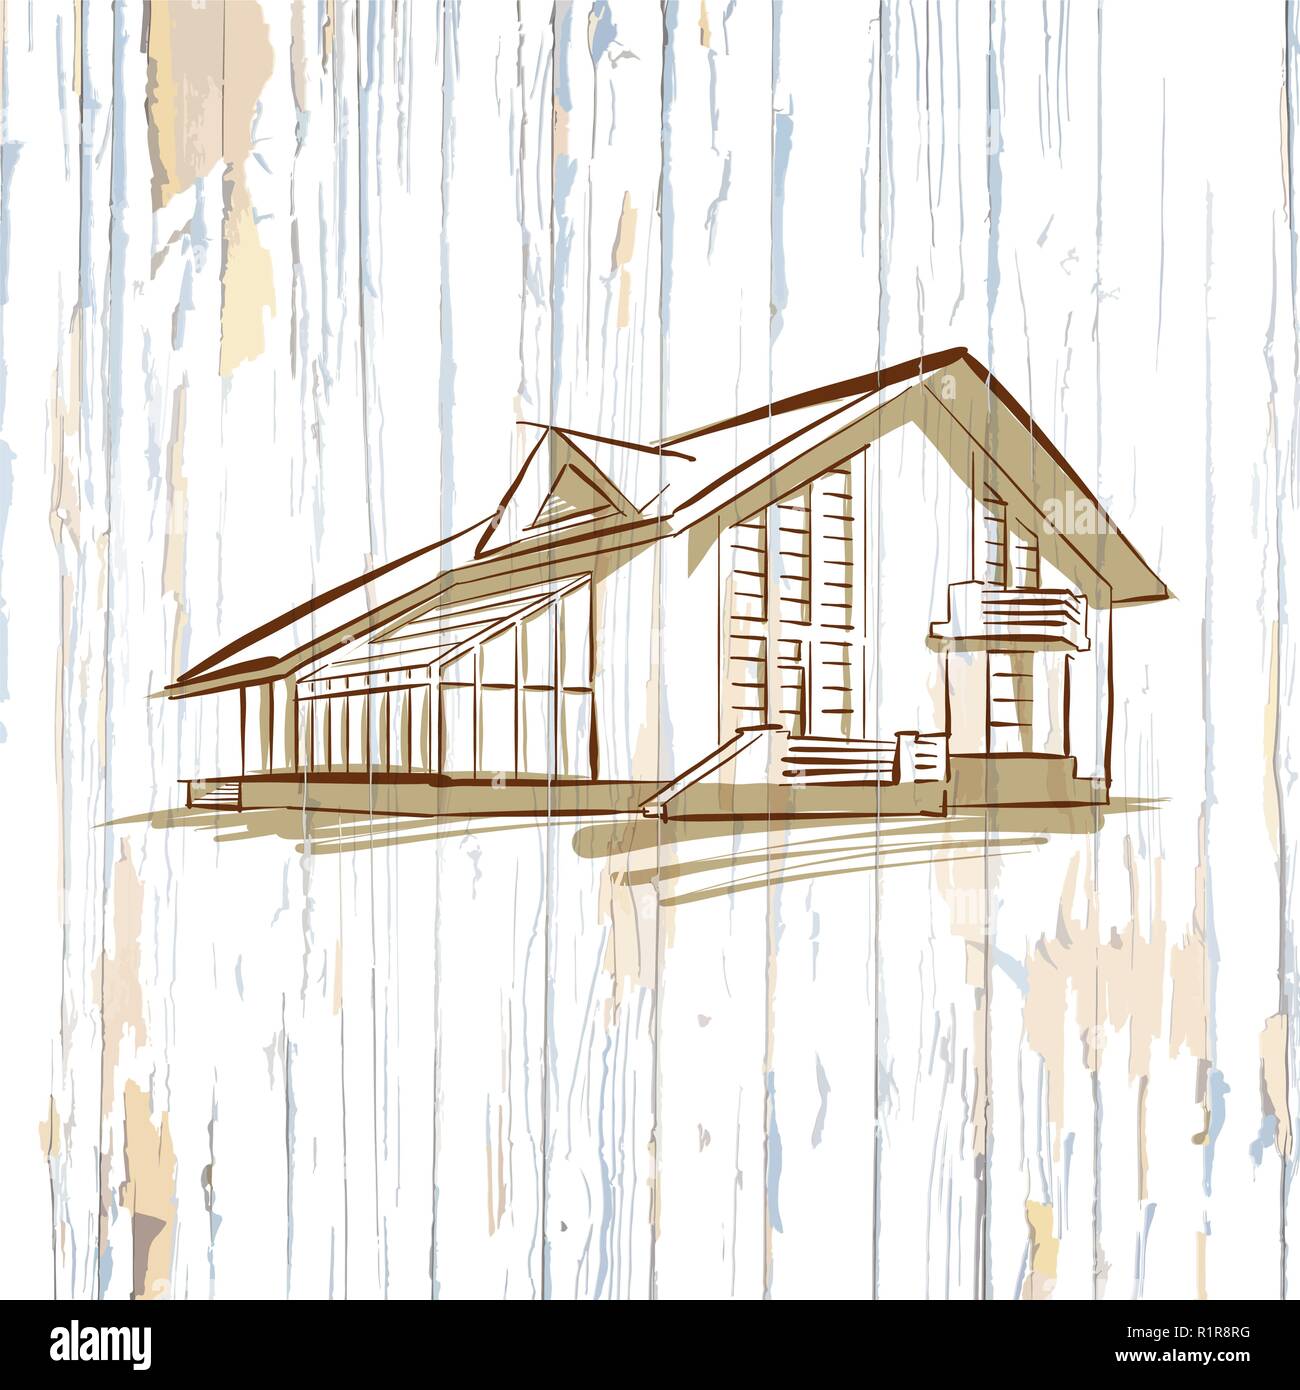 Modern house on old wooden background. Hand-drawn vector vintage illustration. Stock Vector